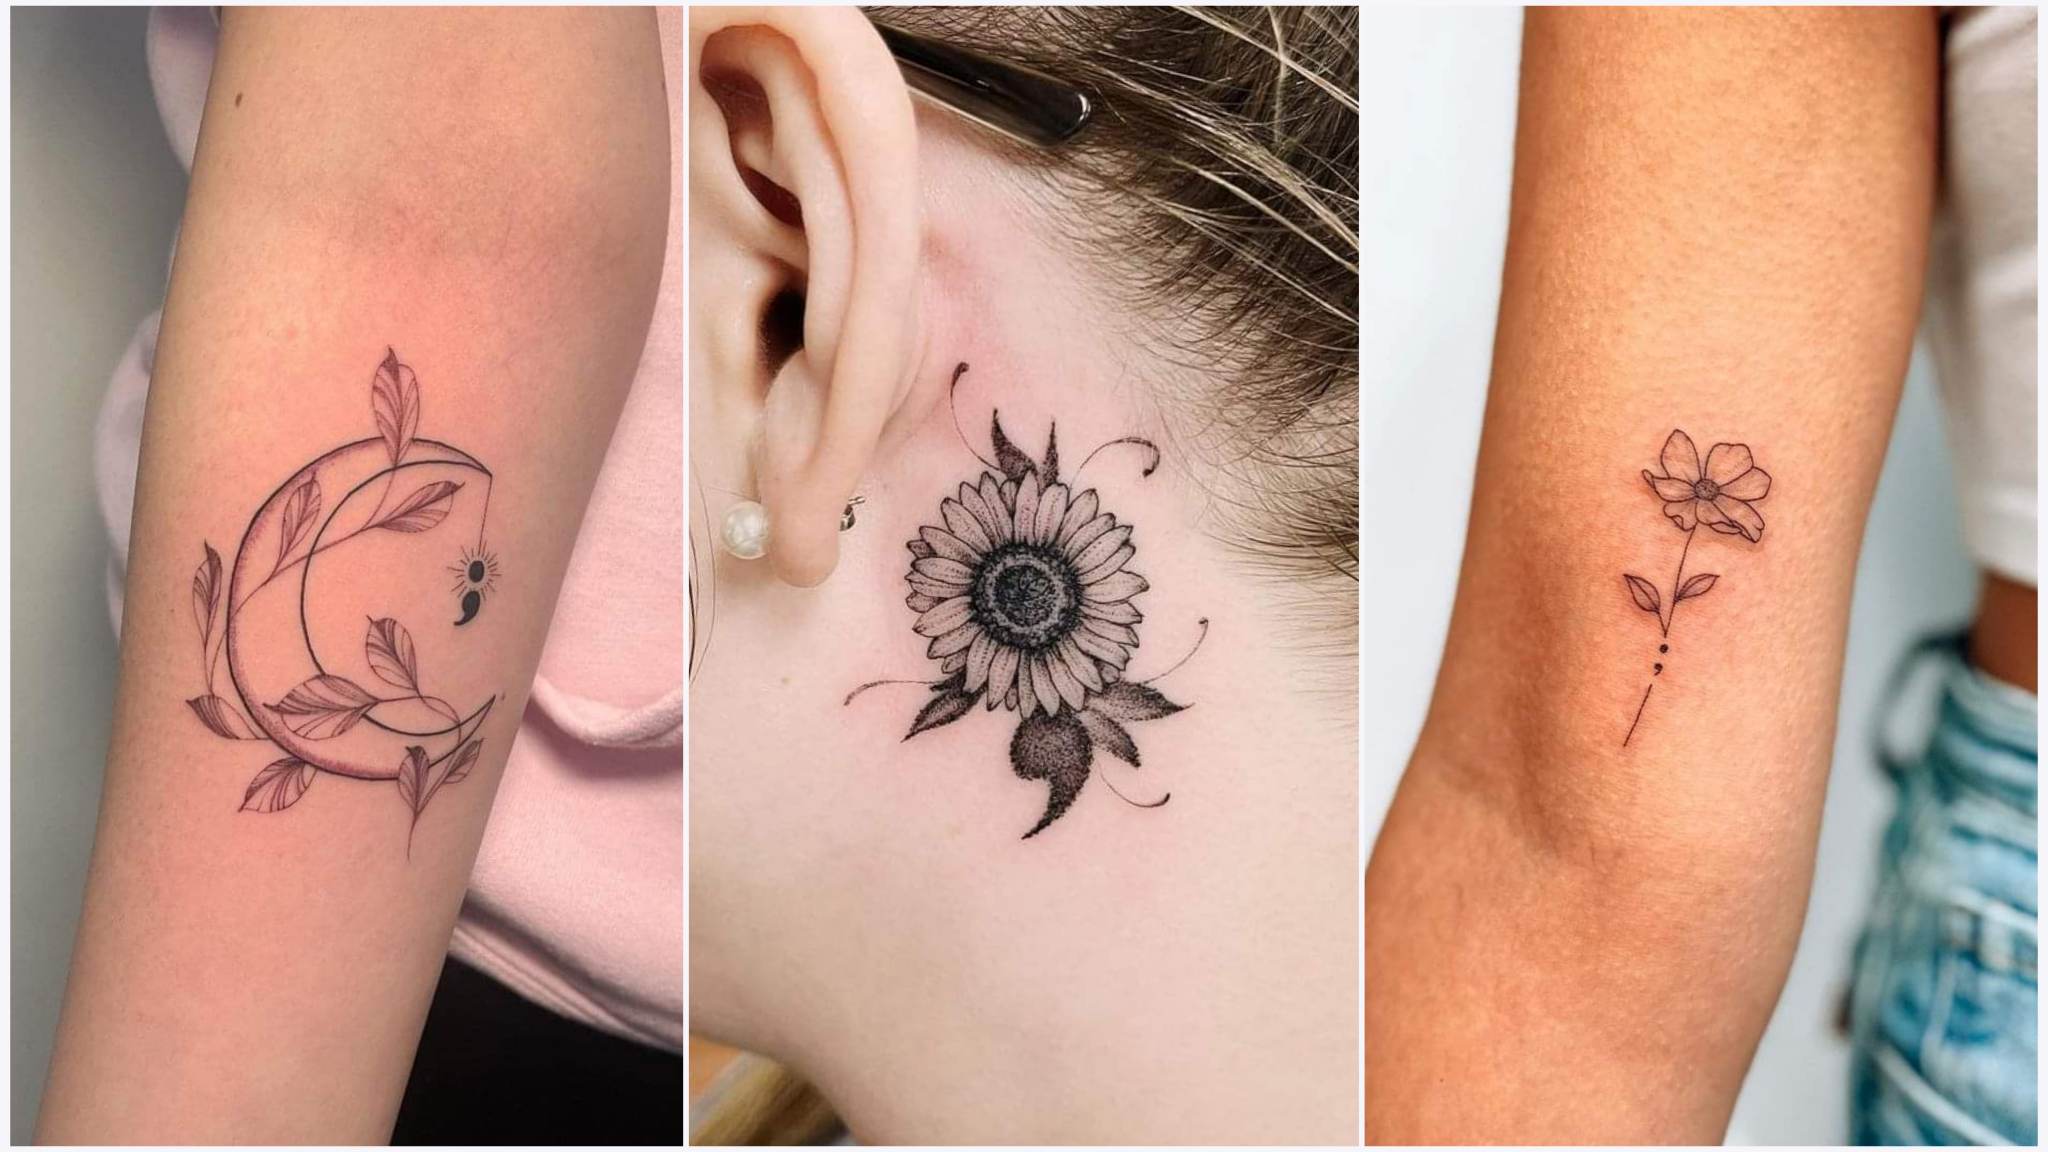 Curious About The Semicolon Tattoo Movement?